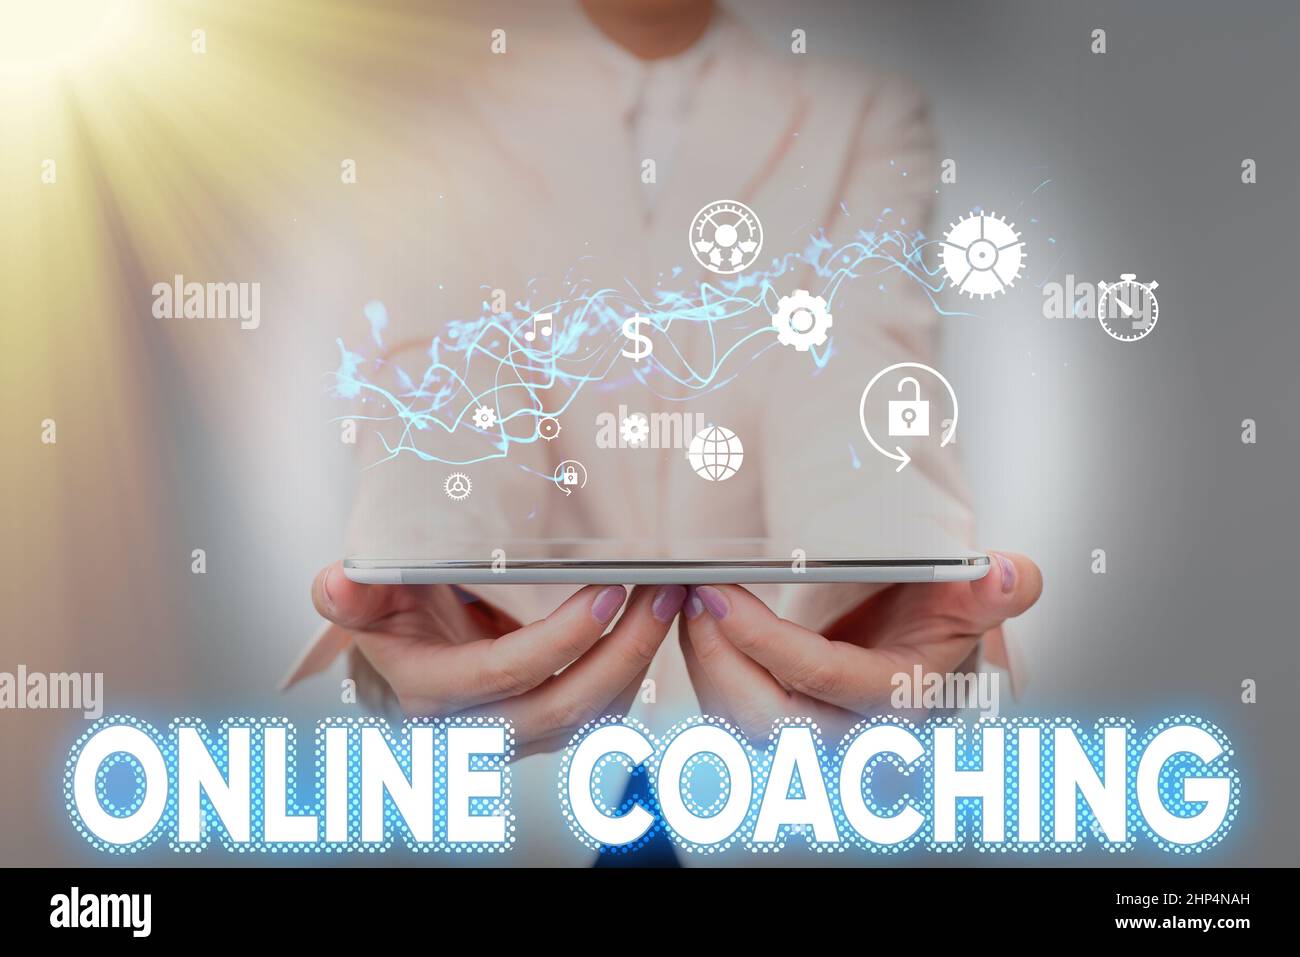 Writing displaying text Online Coaching, Internet Concept Learning from online and internet with the help of a coach Lady In Suit Holding Phone And Pe Stock Photo